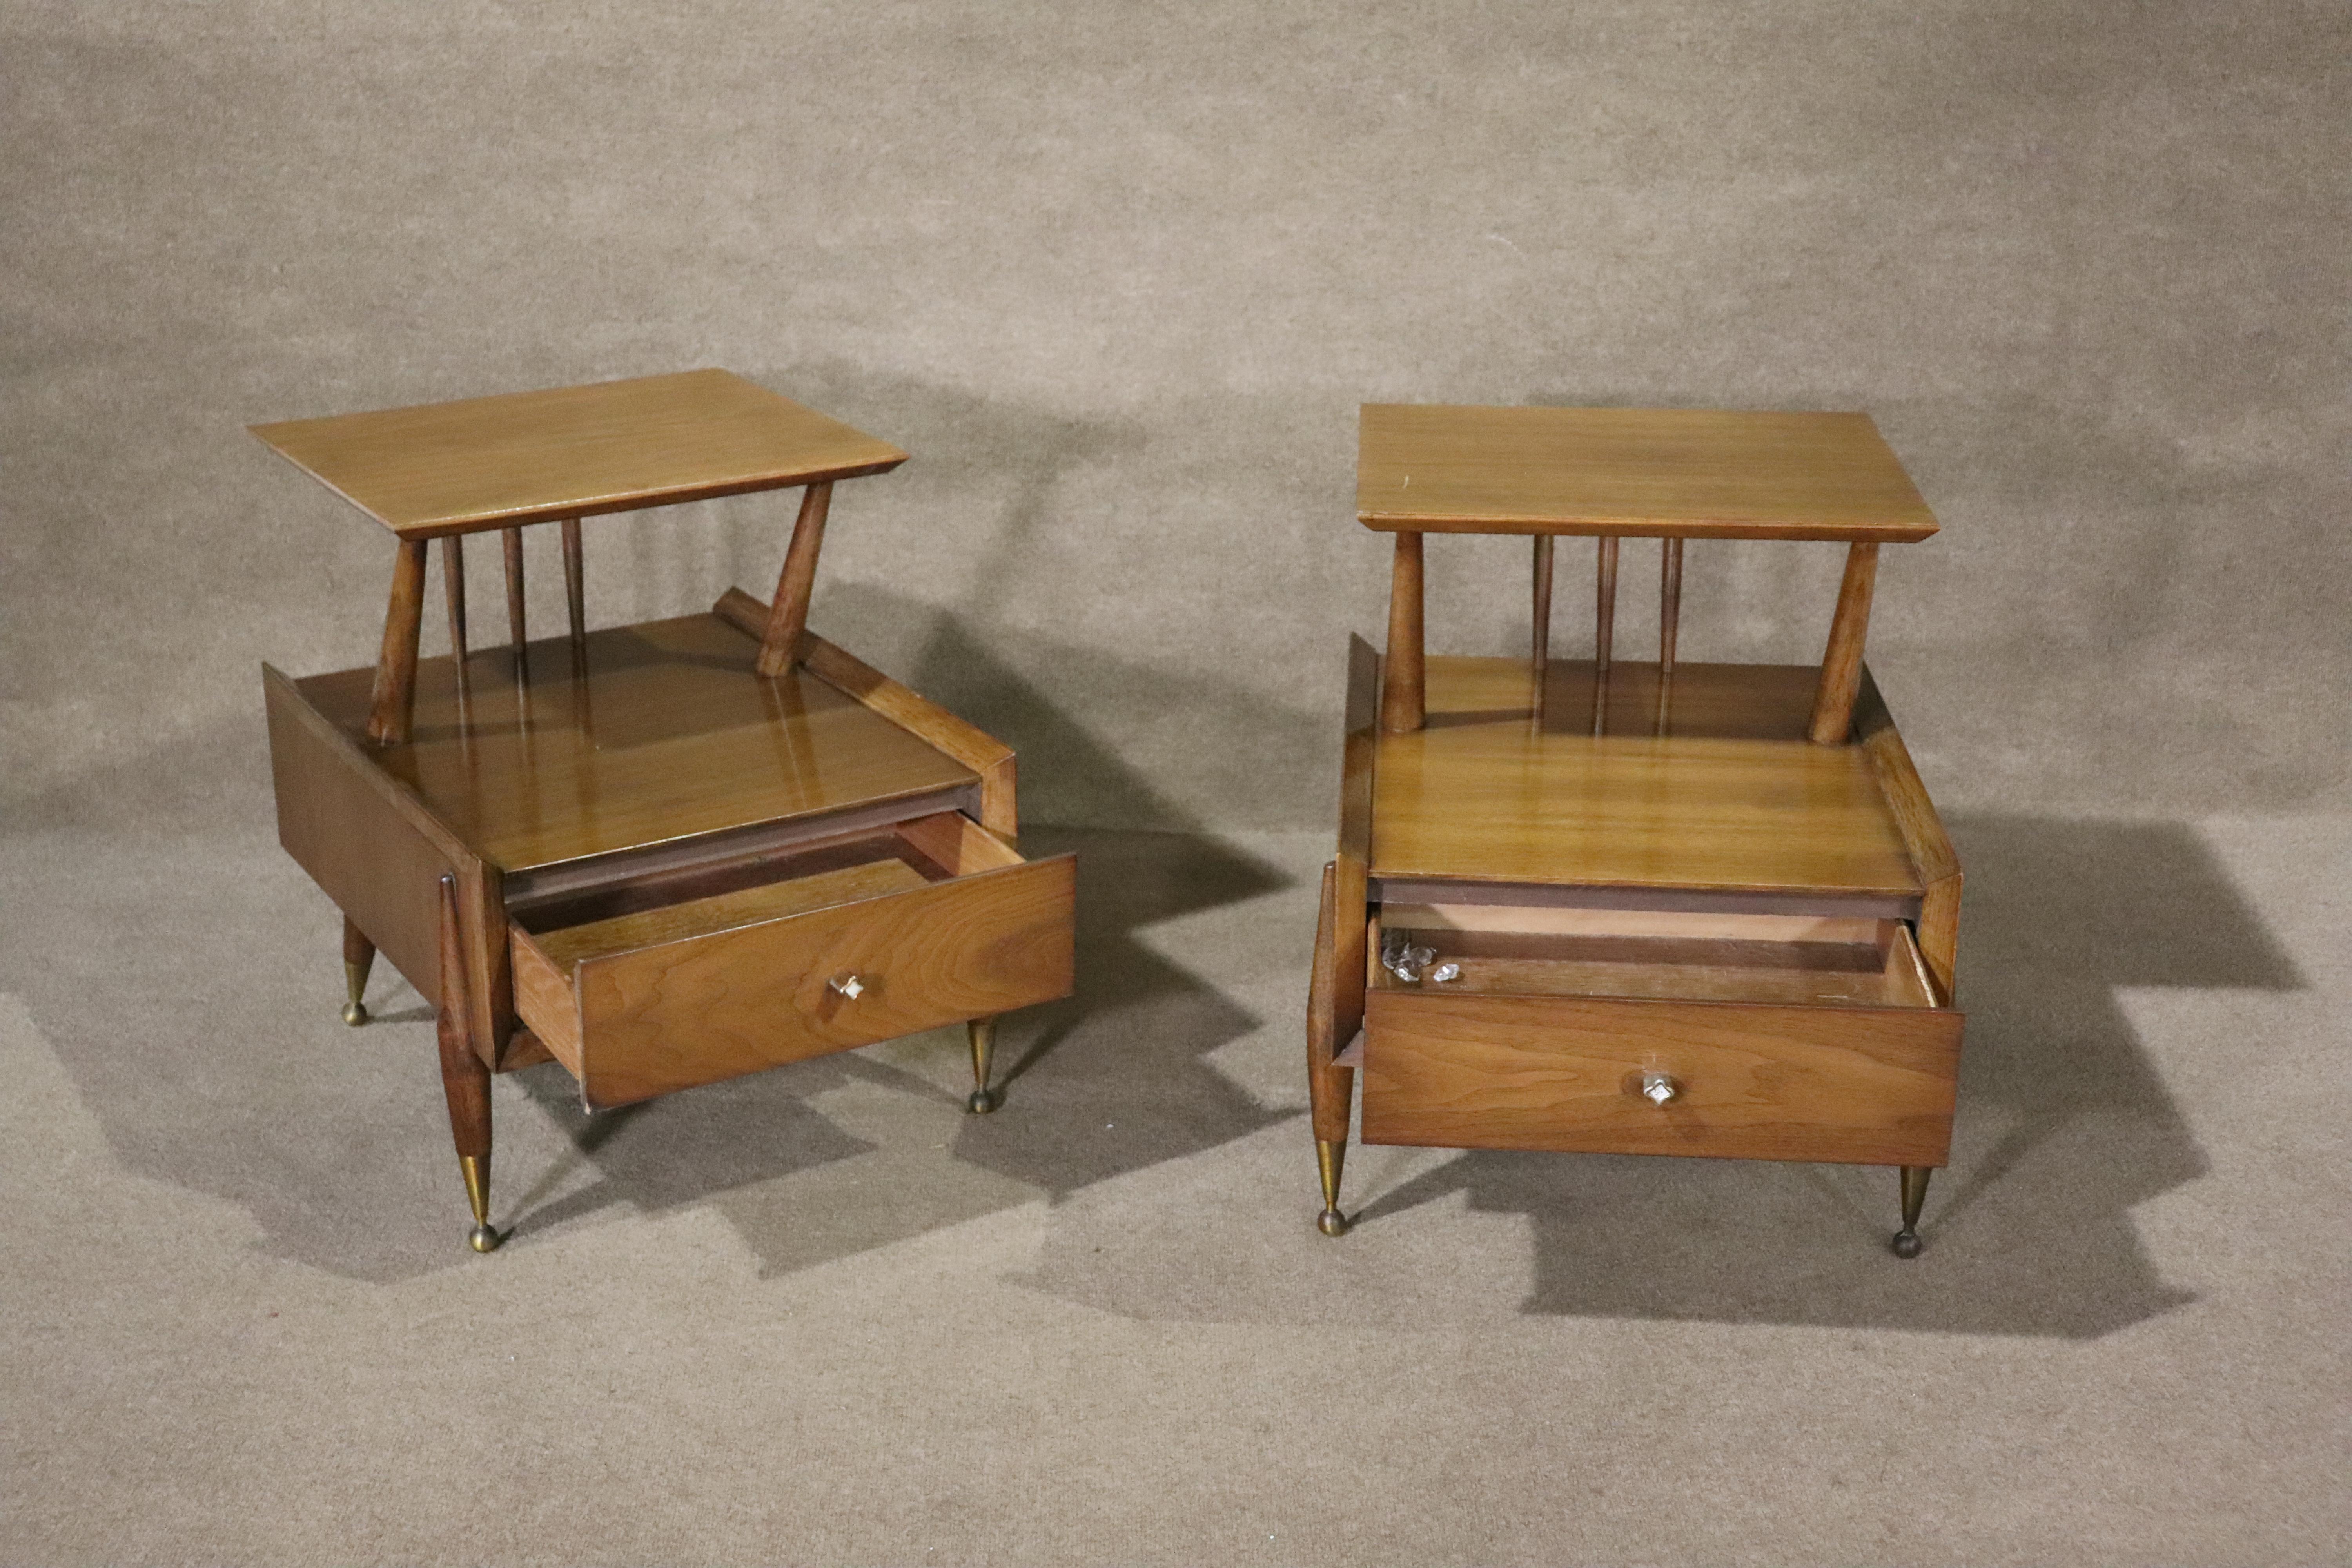 Pair of mid-century modern two tier side tables by Kent Coffey. Warm walnut grain with accenting brass hardware.
Please confirm location NY or NJ